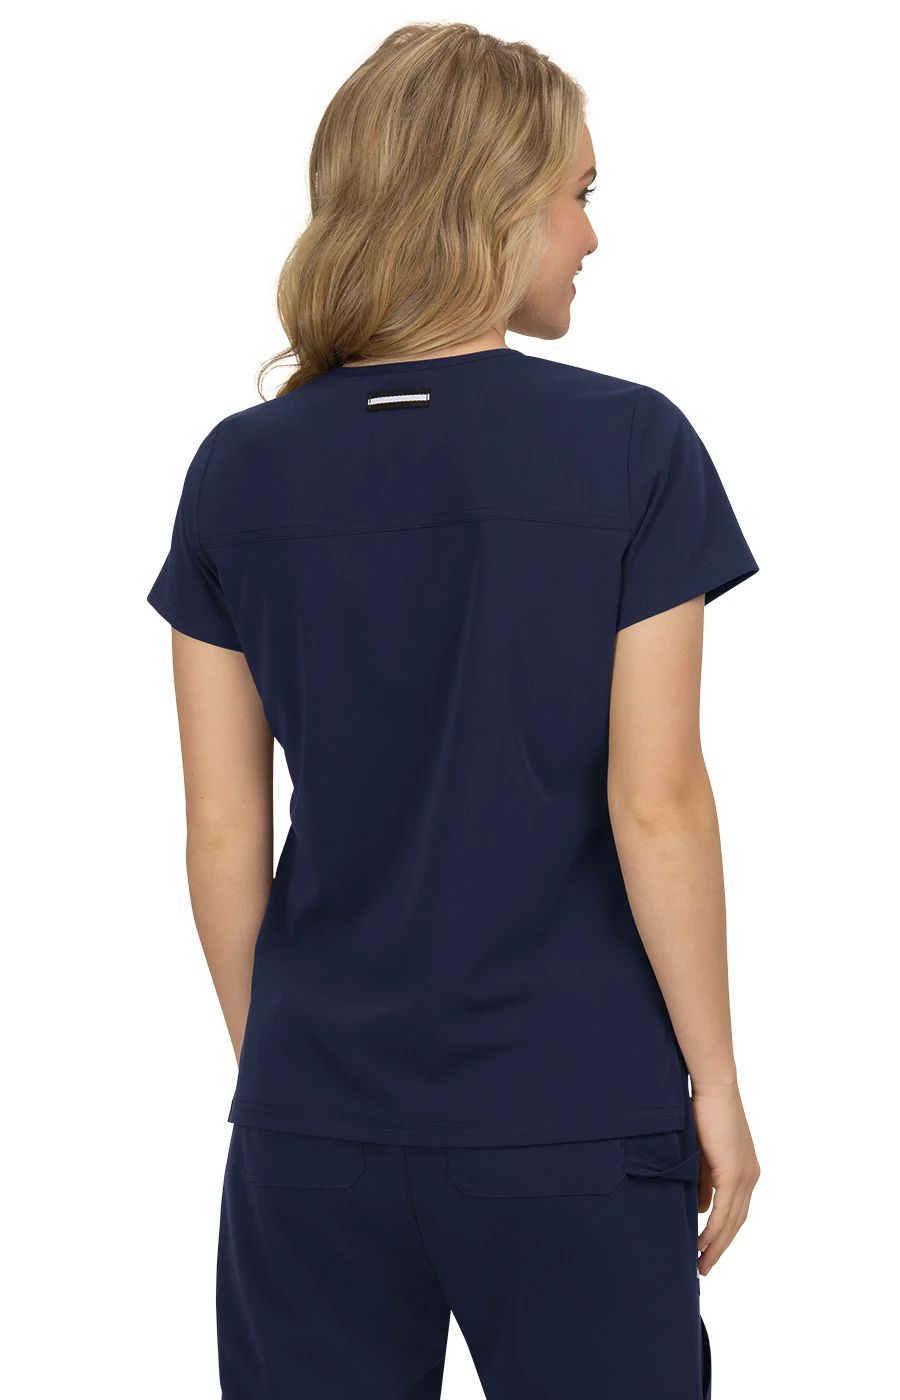 hustle-and-heart-top-navy